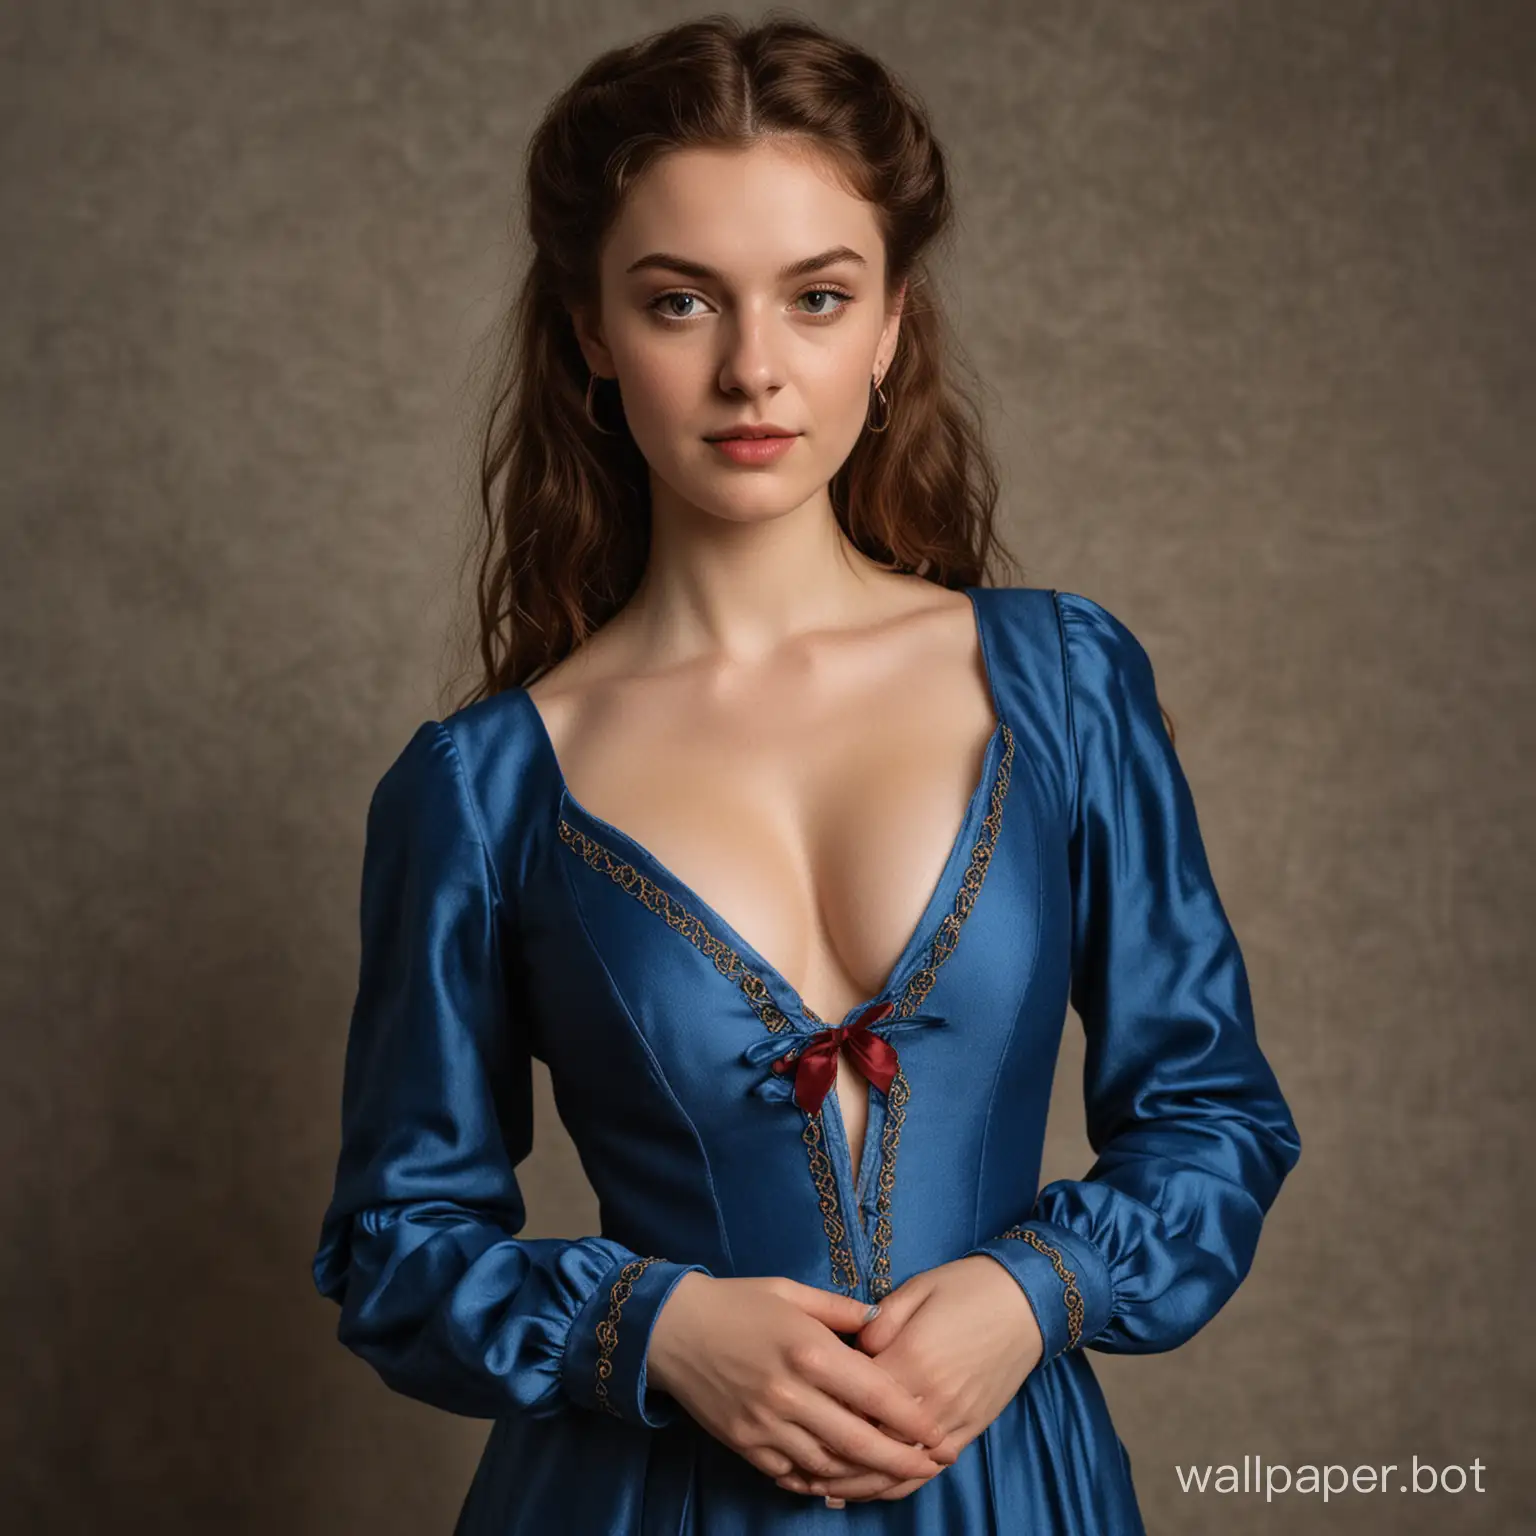 A girl from the Renaissance wearing a ribbon blue felt slit dress and deep v neck showing cleavage